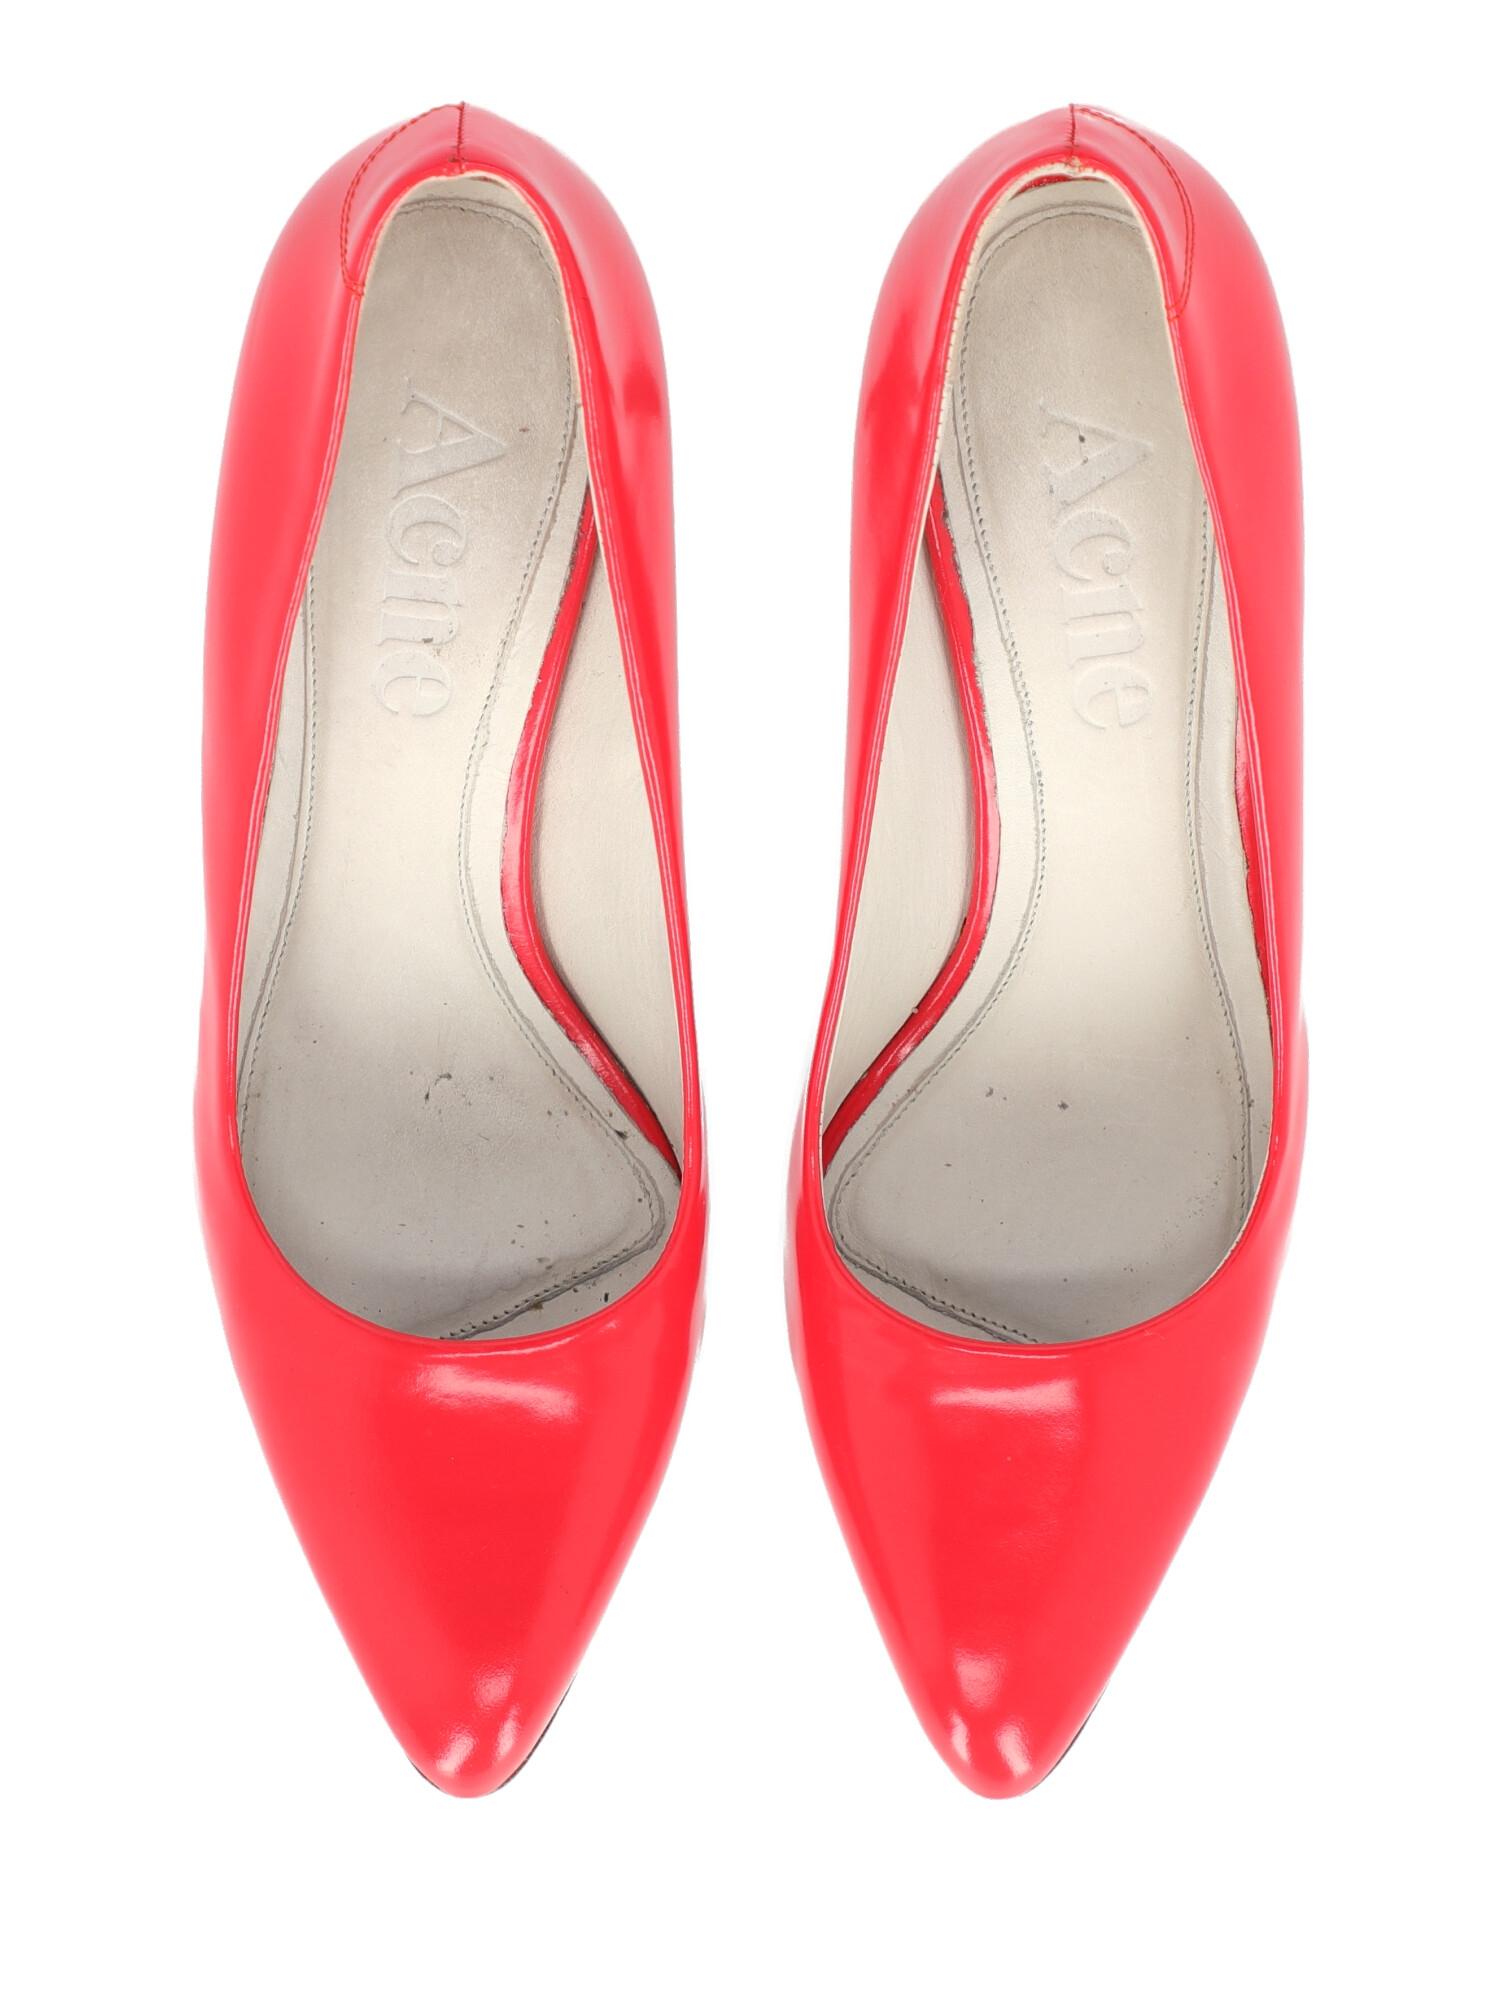 Acne Studios Woman Pumps Red Leather IT 38 For Sale 1